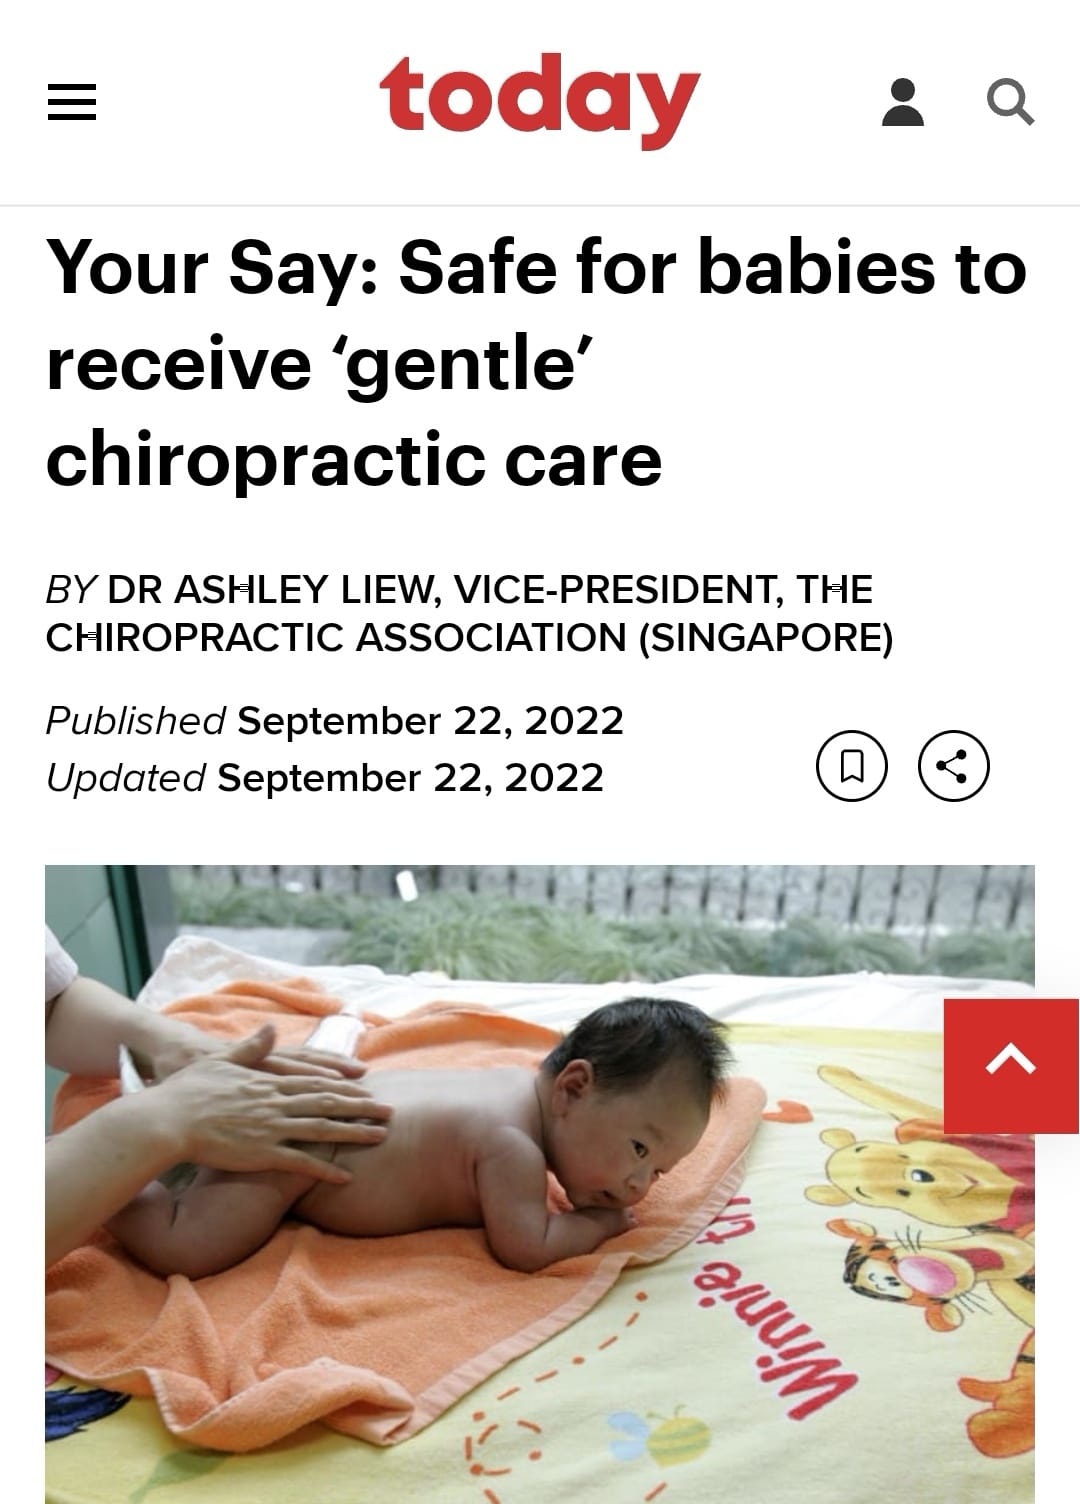 Safe for babies to receive ‘gentle’ chiropractic care